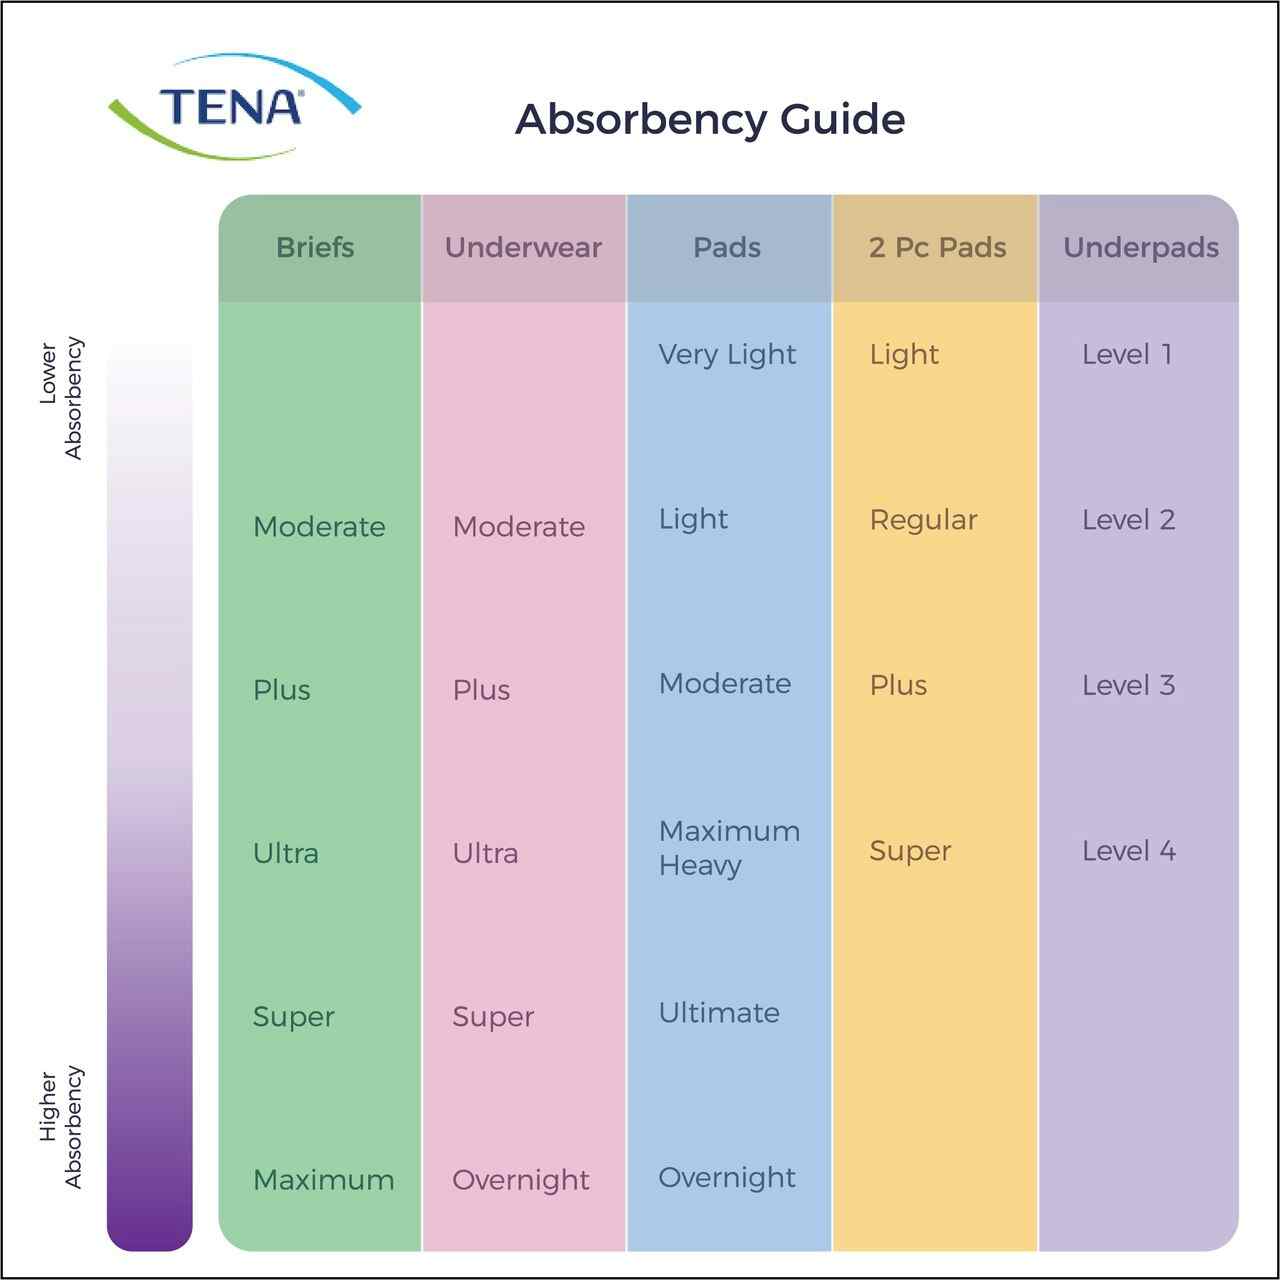 TENA Night Super Heavy Incontinence Pad, Super Absorbency